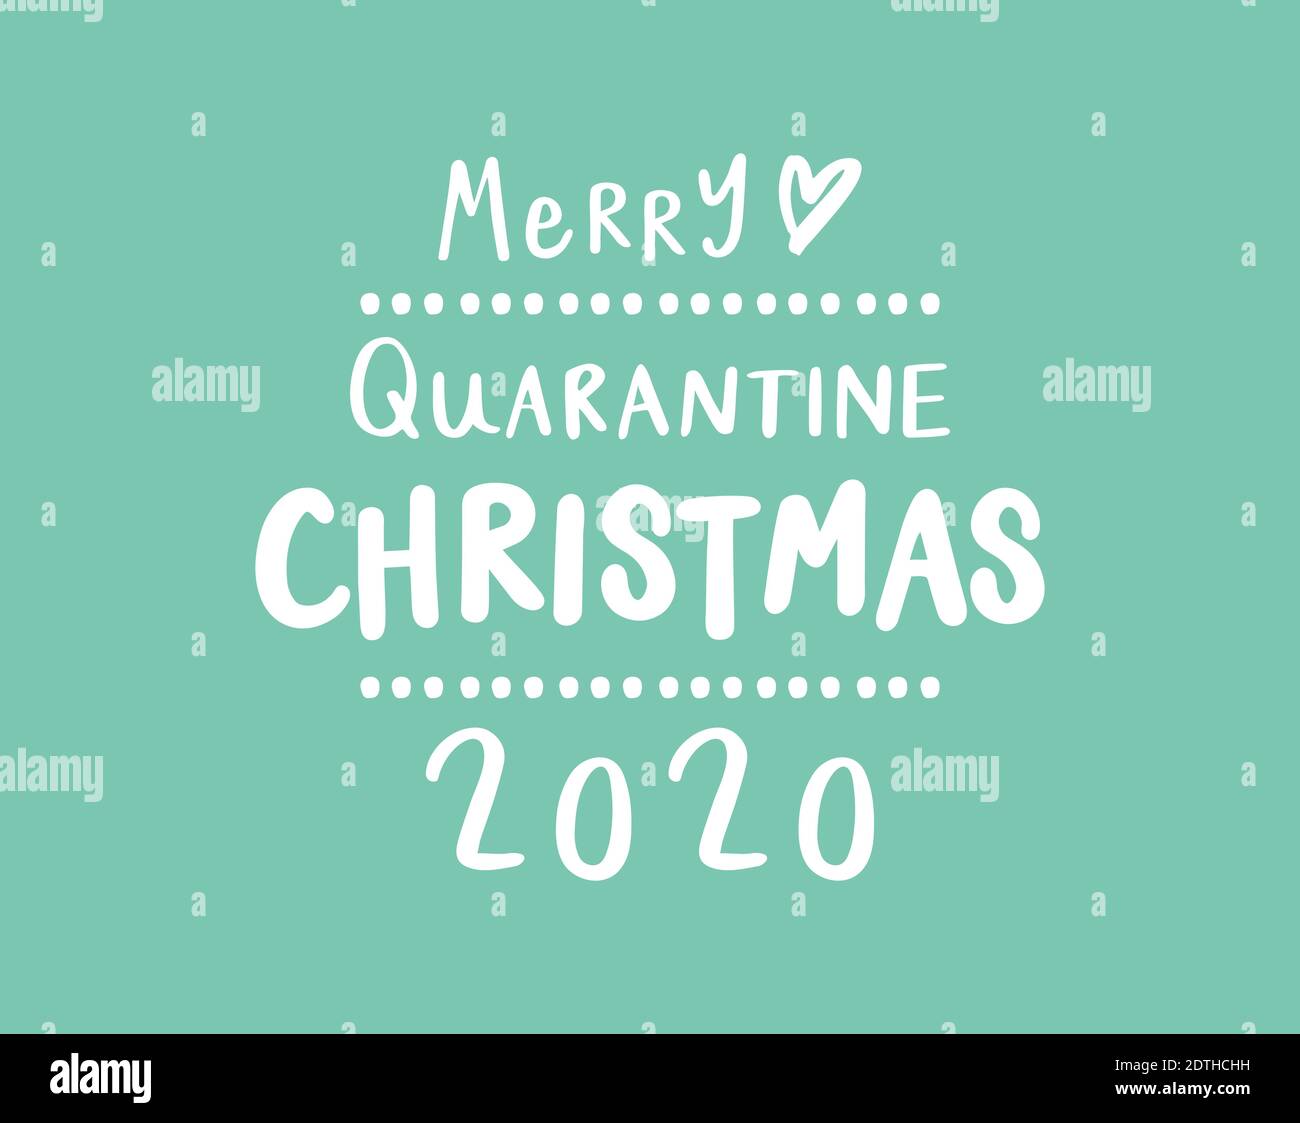 Merry quarantine Christmas 2020 text on pastel green background Stock Vector